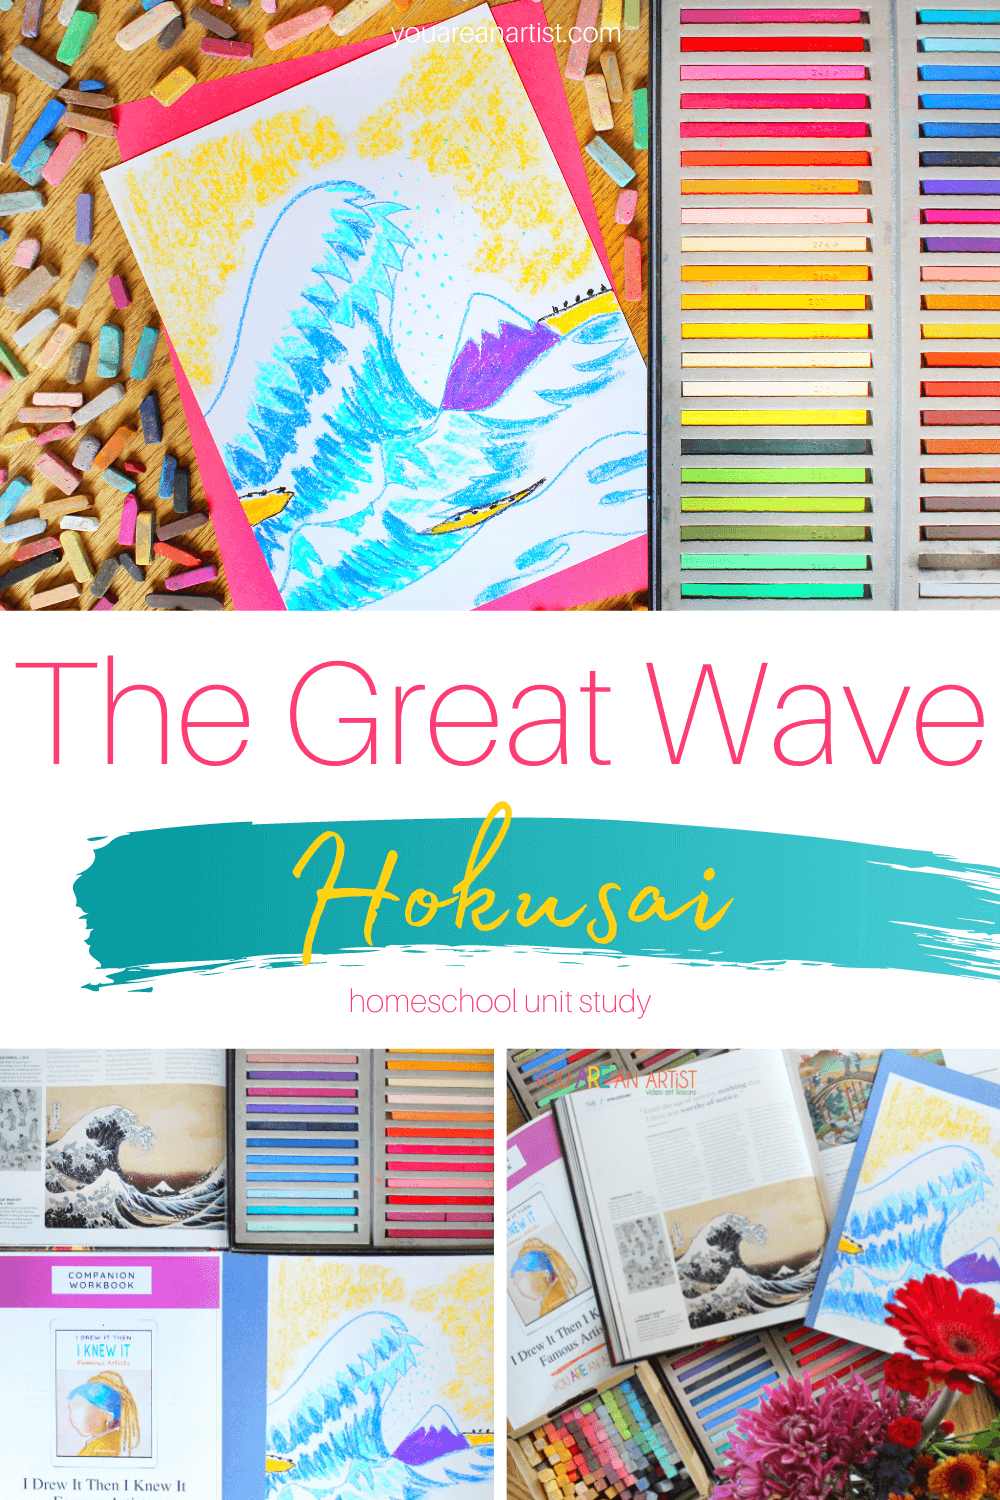 Hokusai The Great Wave Homeschool Unit Study: With Nana's video art lesson and other resources, your kids will love learning about Hokusai's The Great Wave! #arteducation #Hokusai #TheGreatWave #HokusaiTheGreatWave #homeschool #famousartist #podcast